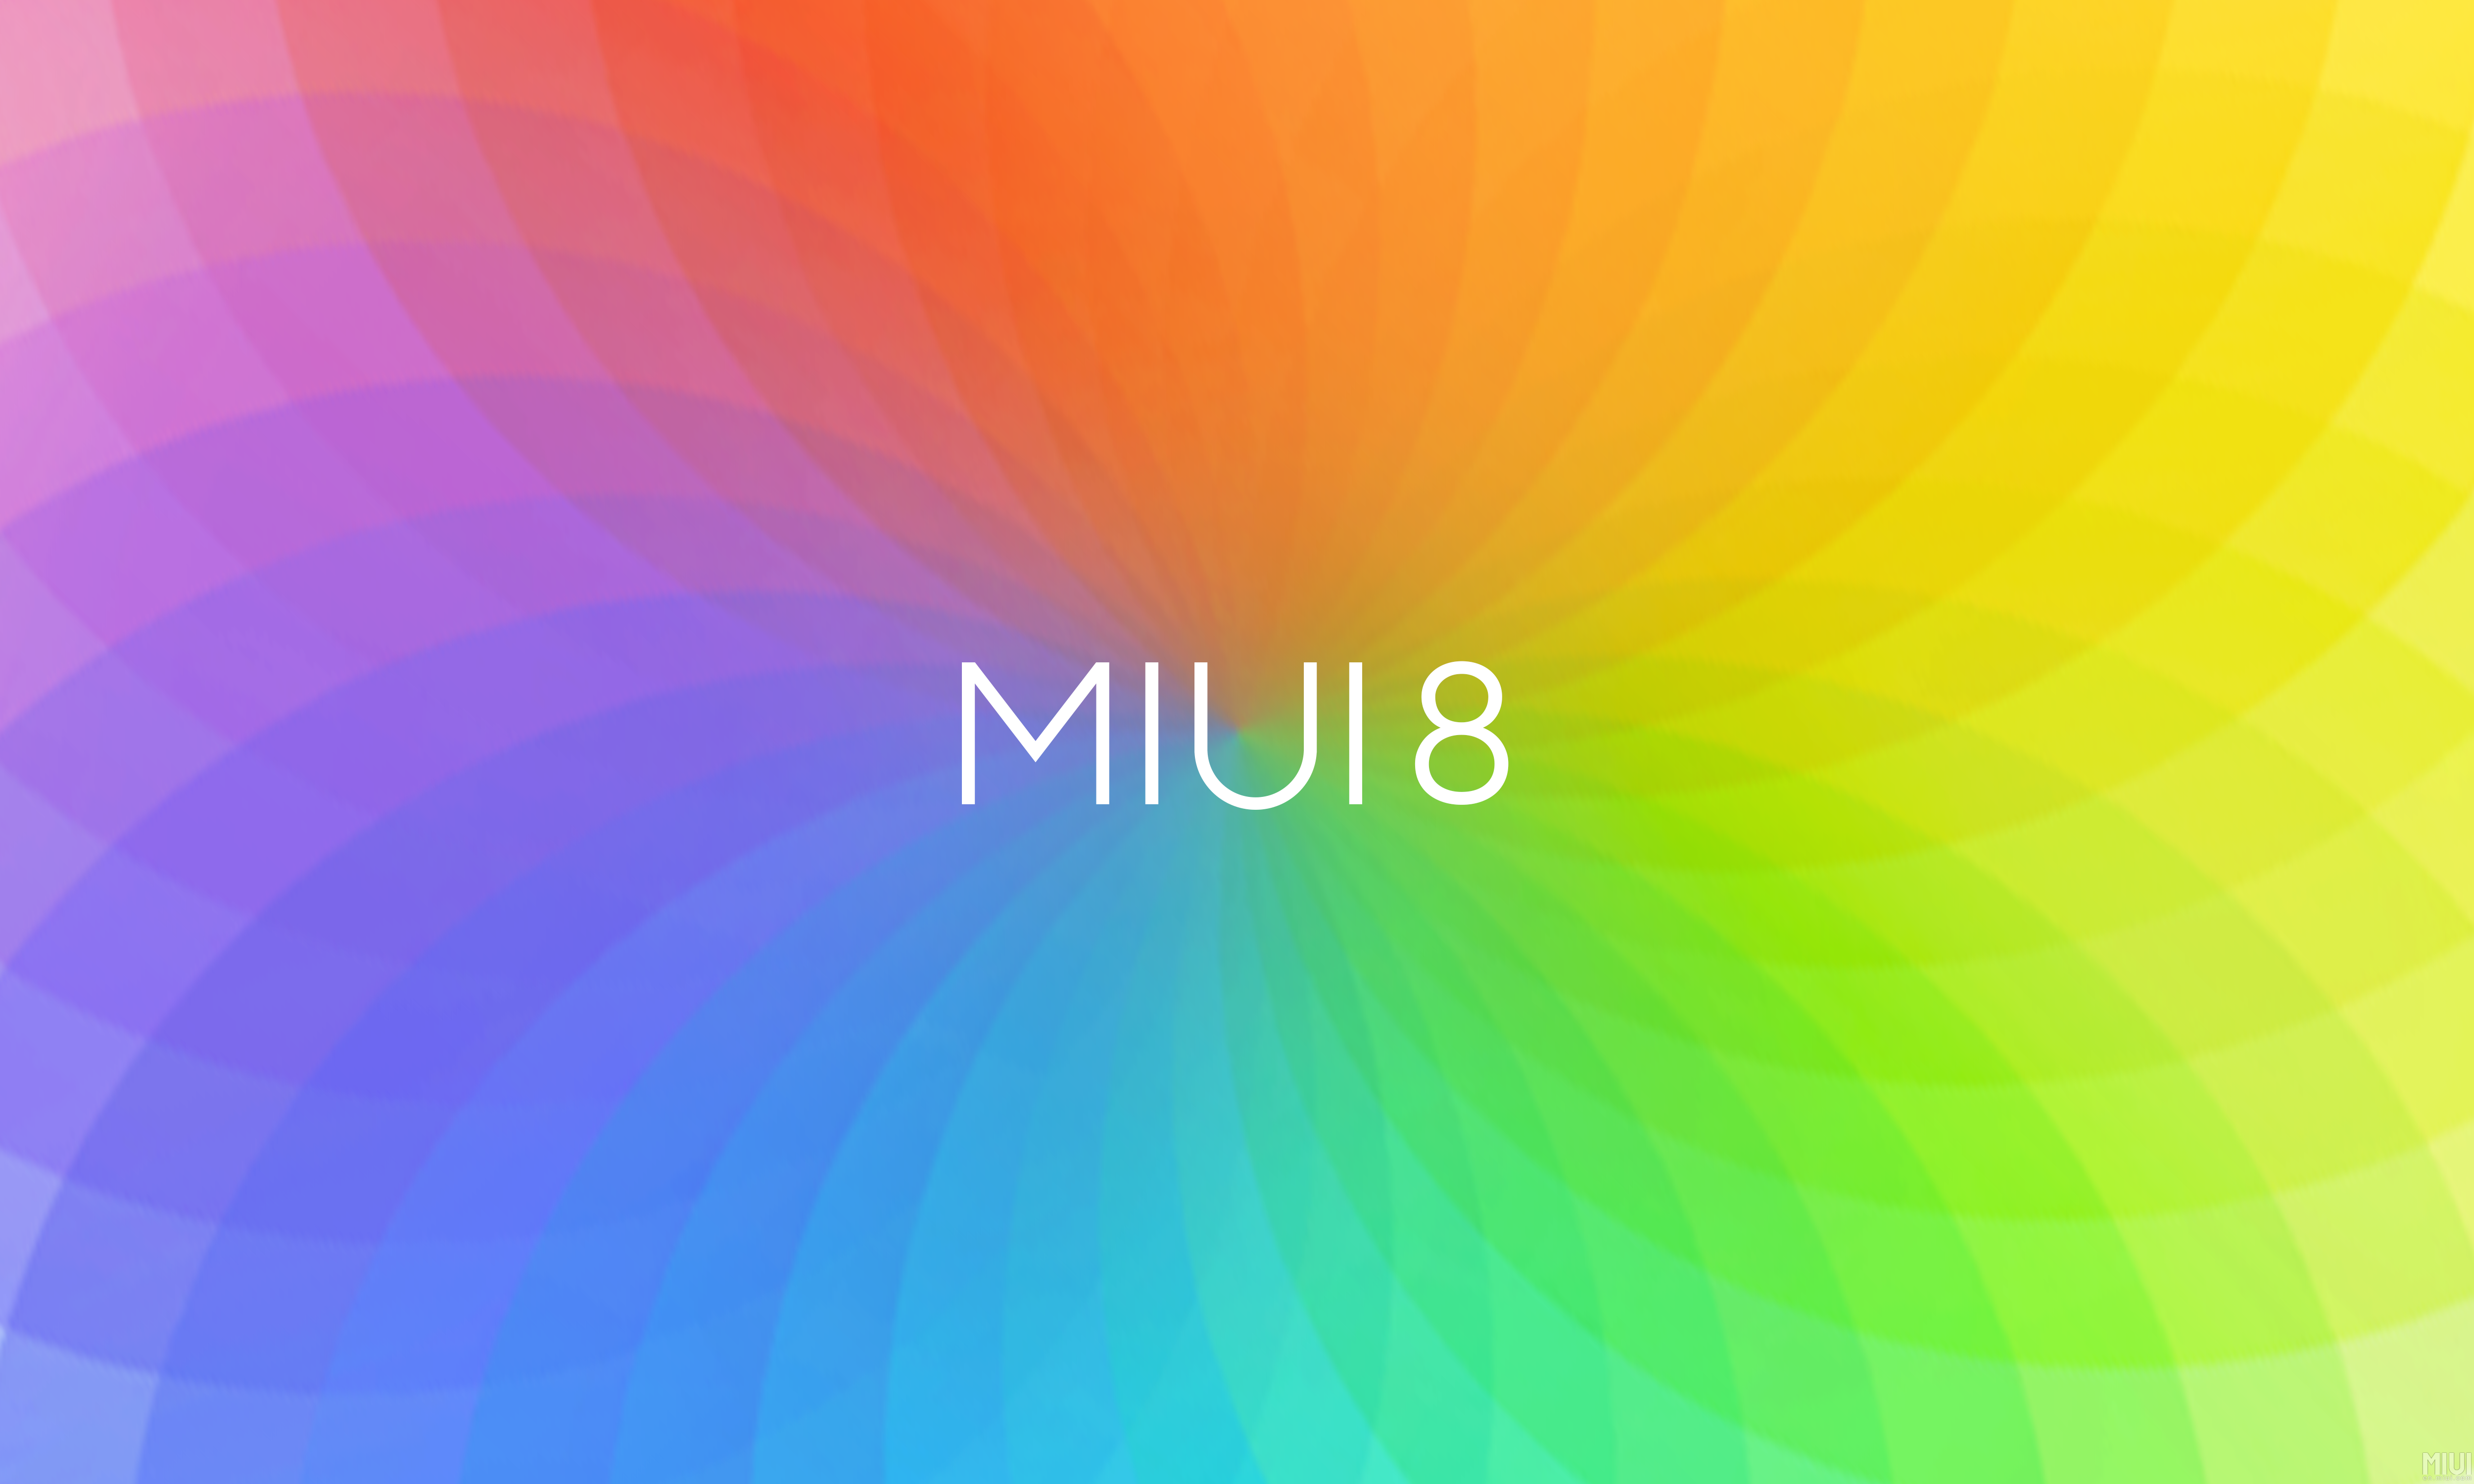 How To Install Android 70 Nougat Based MIUI 8 On Xiaomi Phones